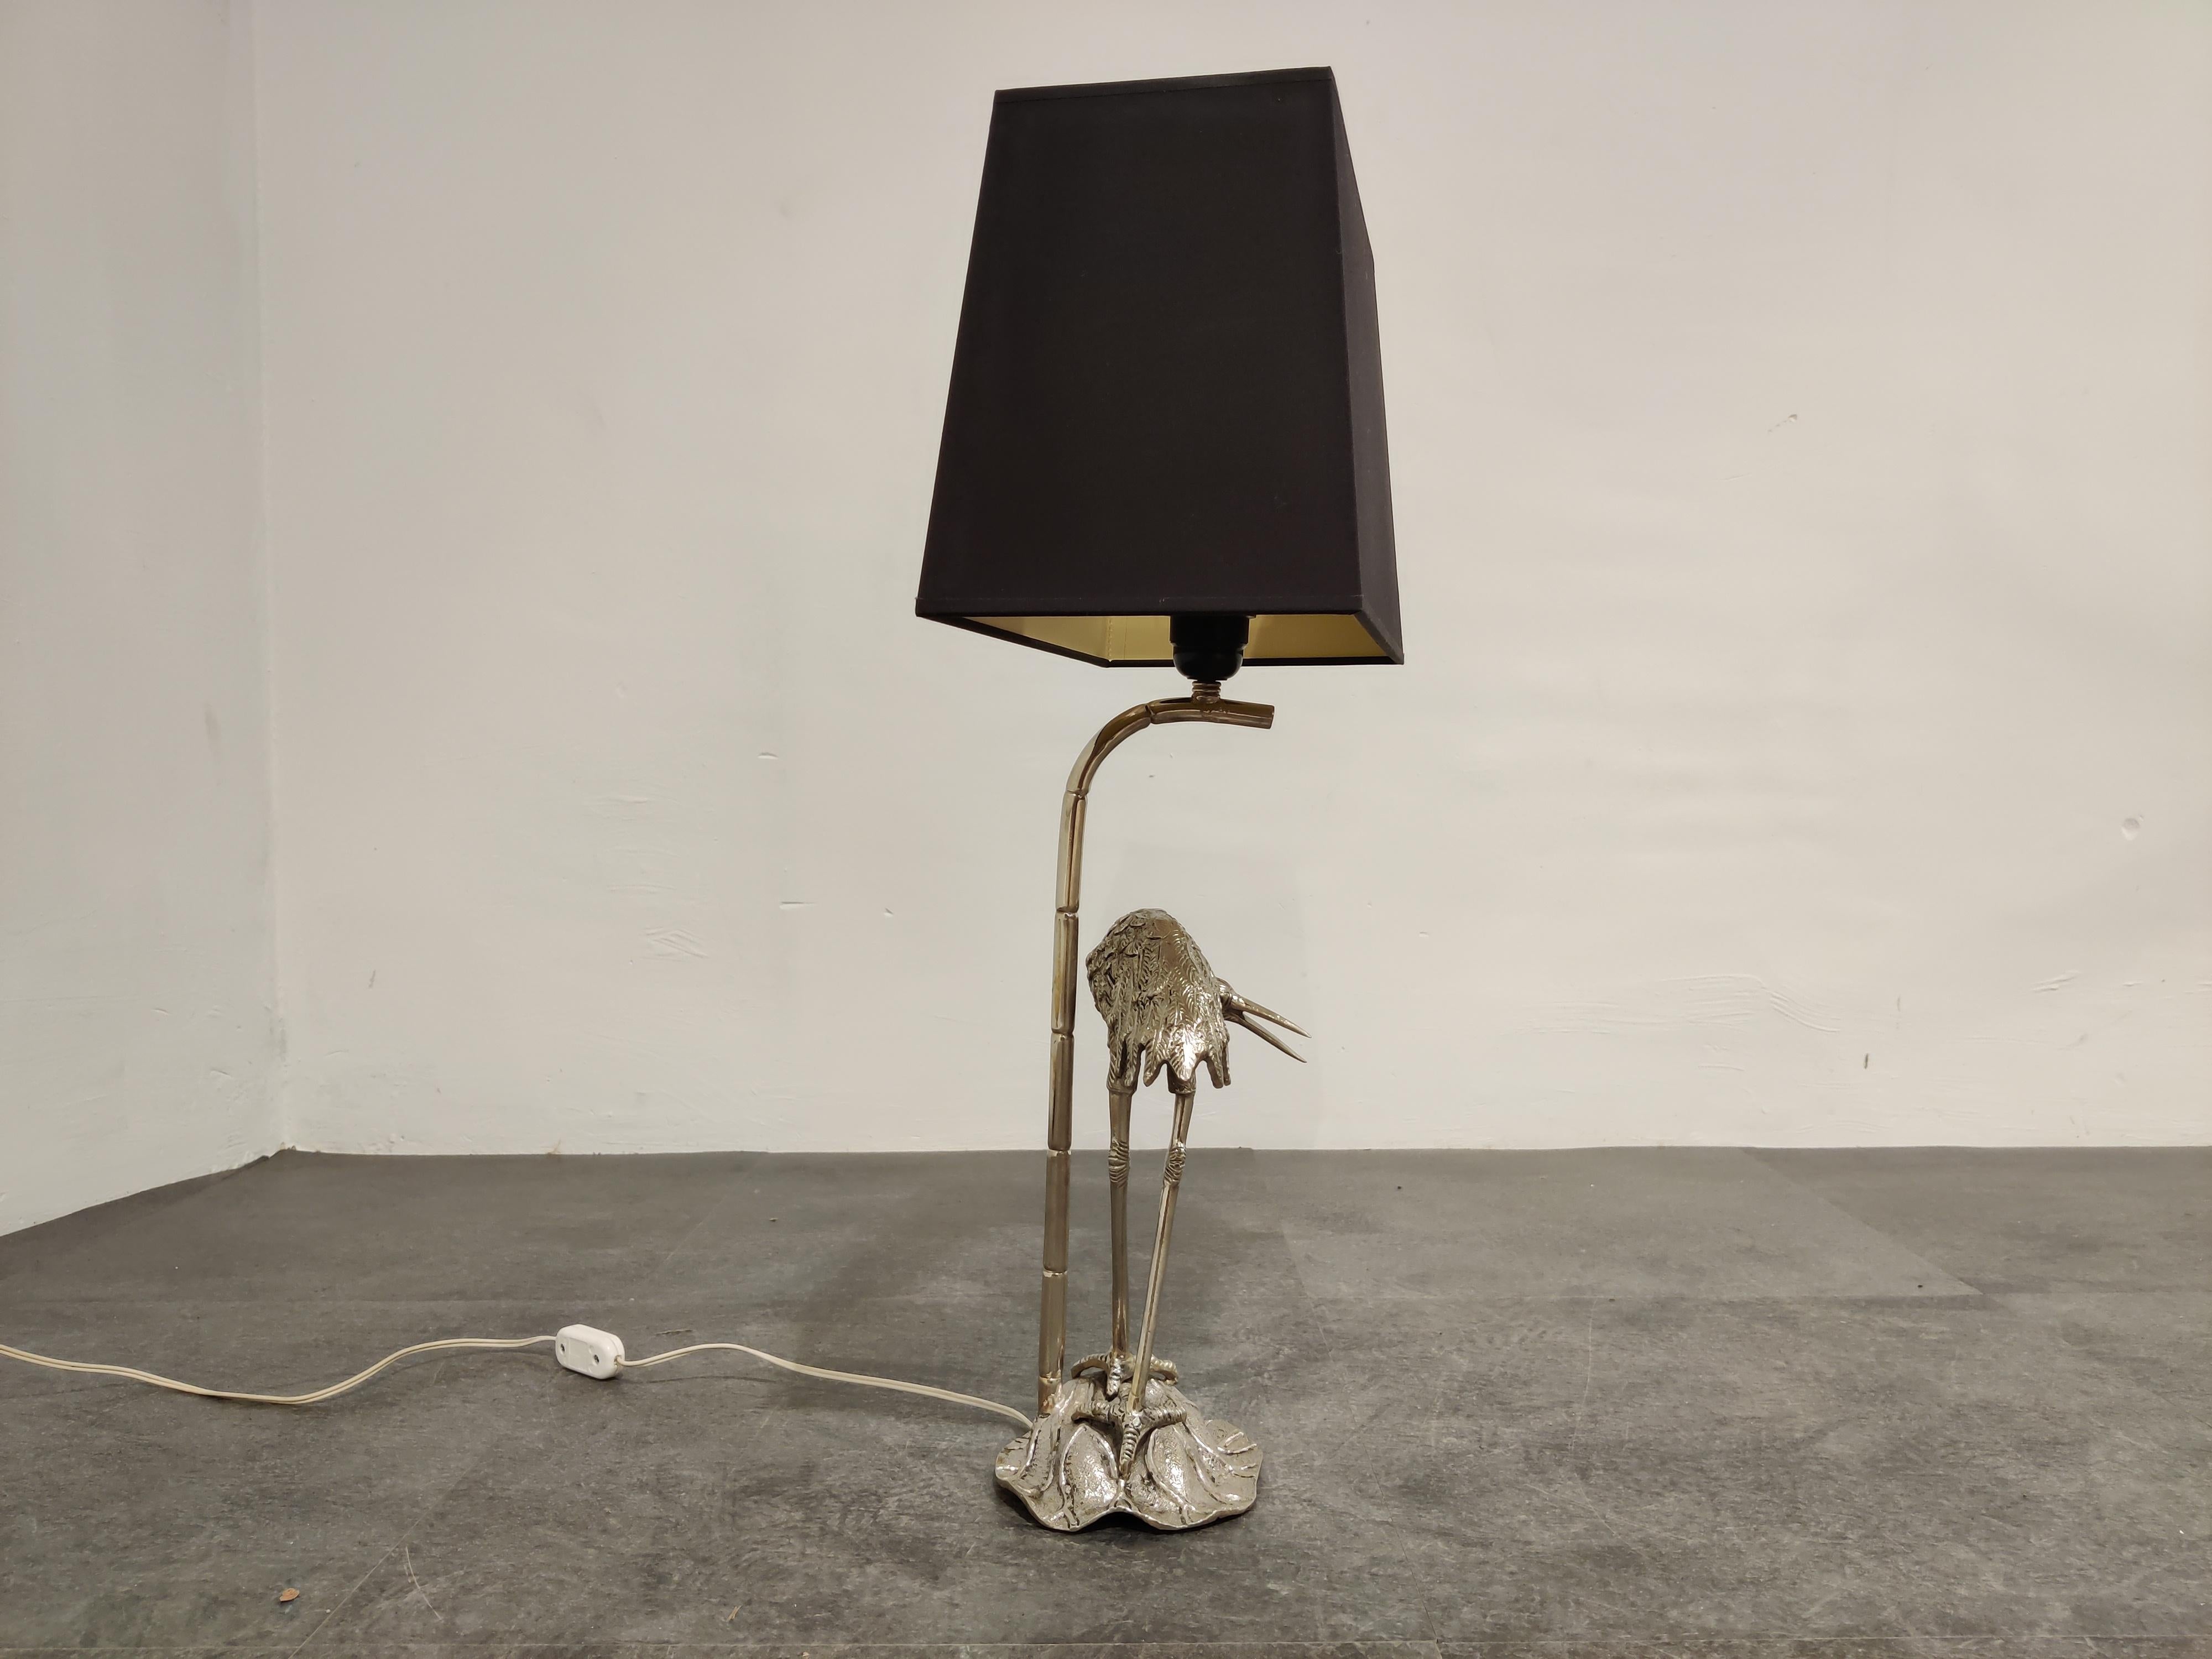 Beautiful crane bird or Héron table lamp by Maison Baguès.

Beautifully detailed silvered crane bird sculpture with a faux bamboo metal rod supporting the lamp and light shade.

New lamp shade creating a warm light.

Tested and ready for use